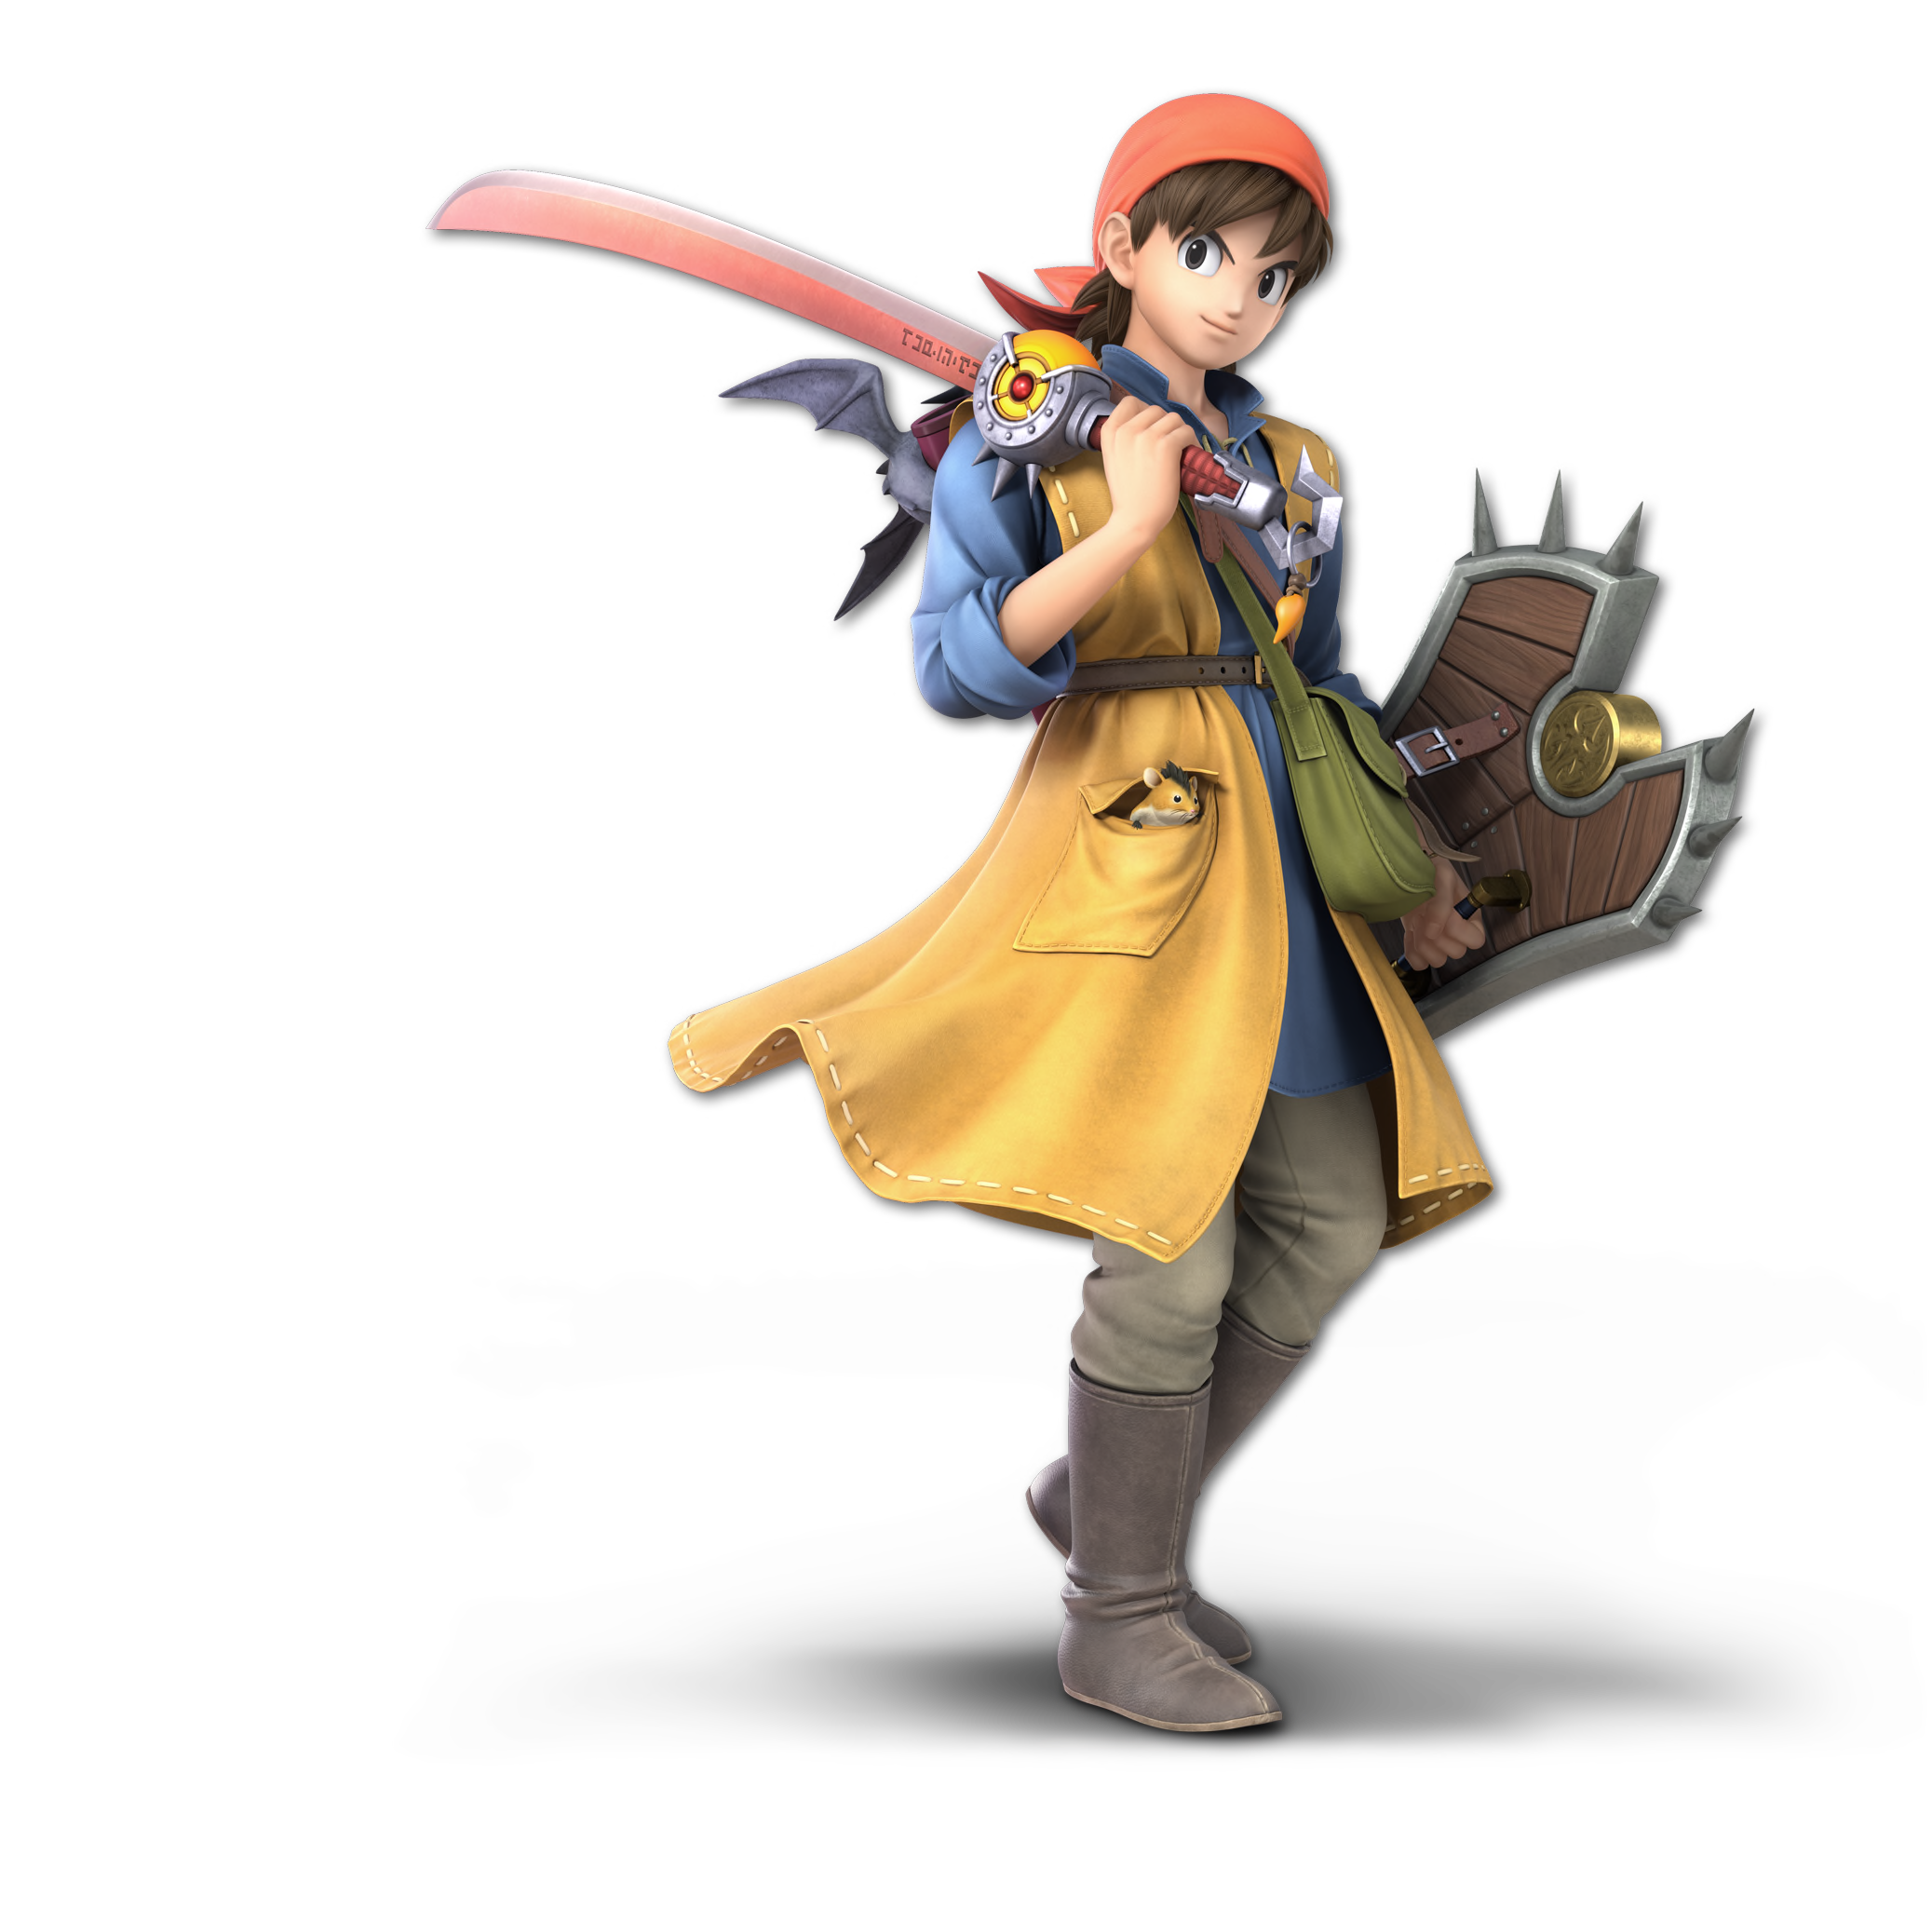 Eight Render From Super Smash Bros. Ultimate